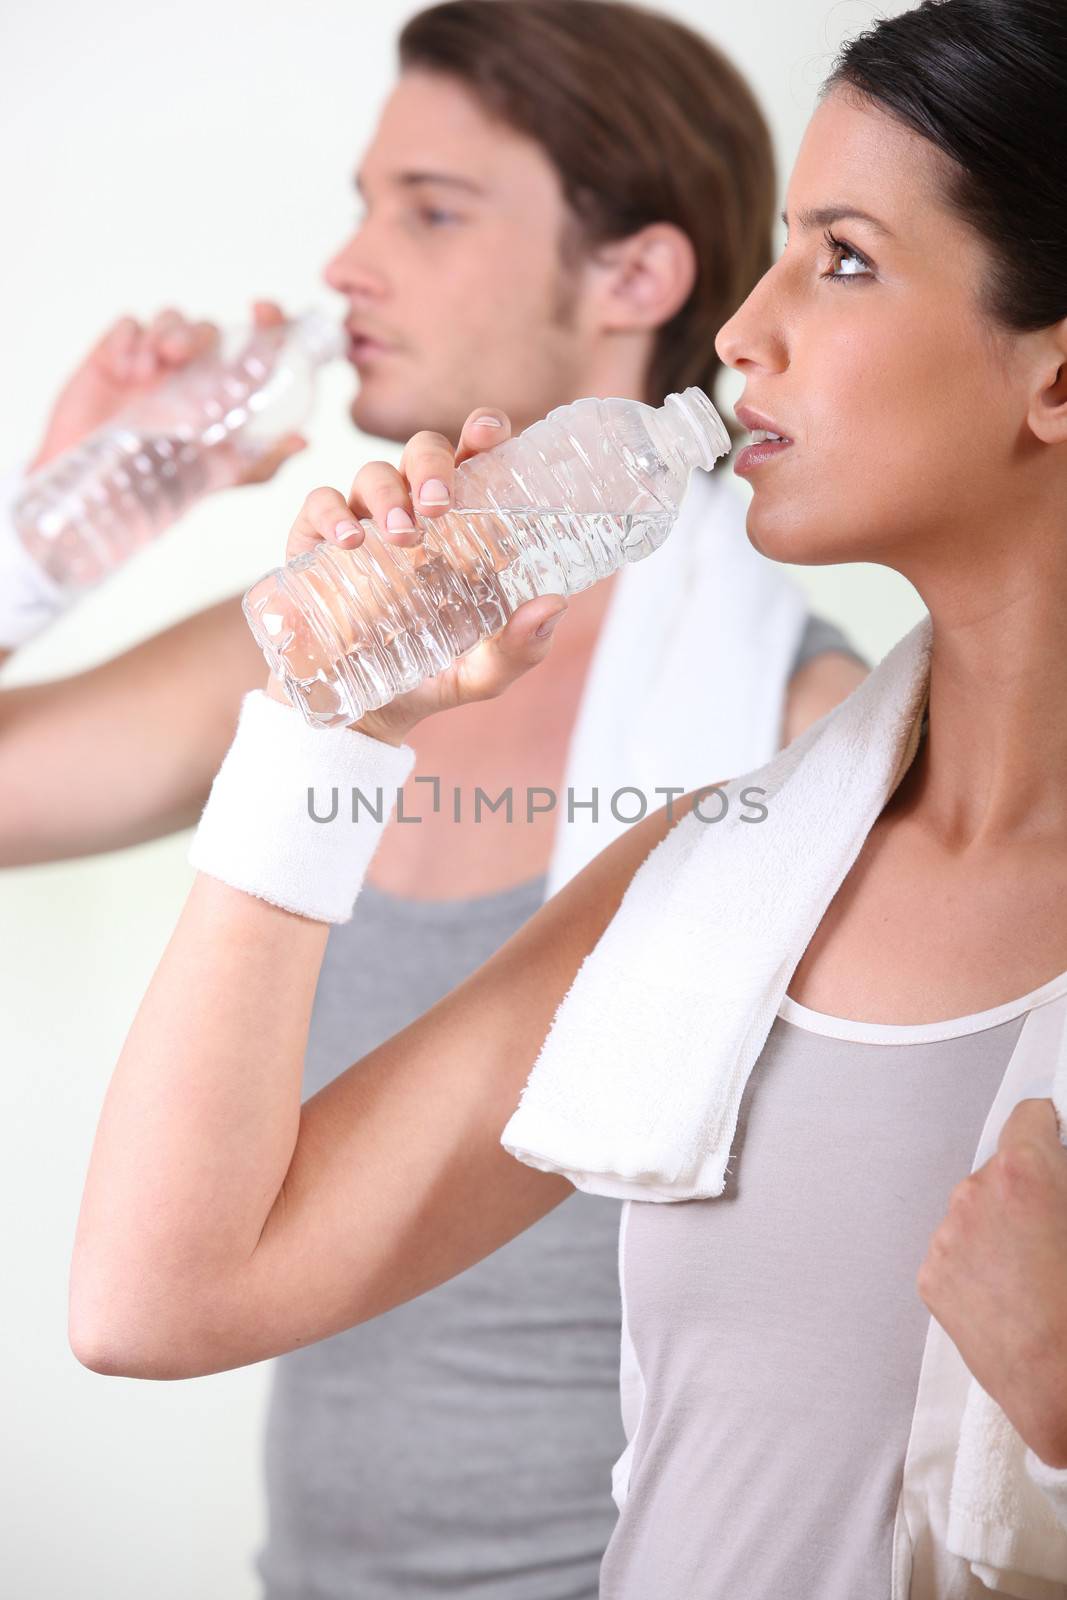 a couple drinking water after sport by phovoir